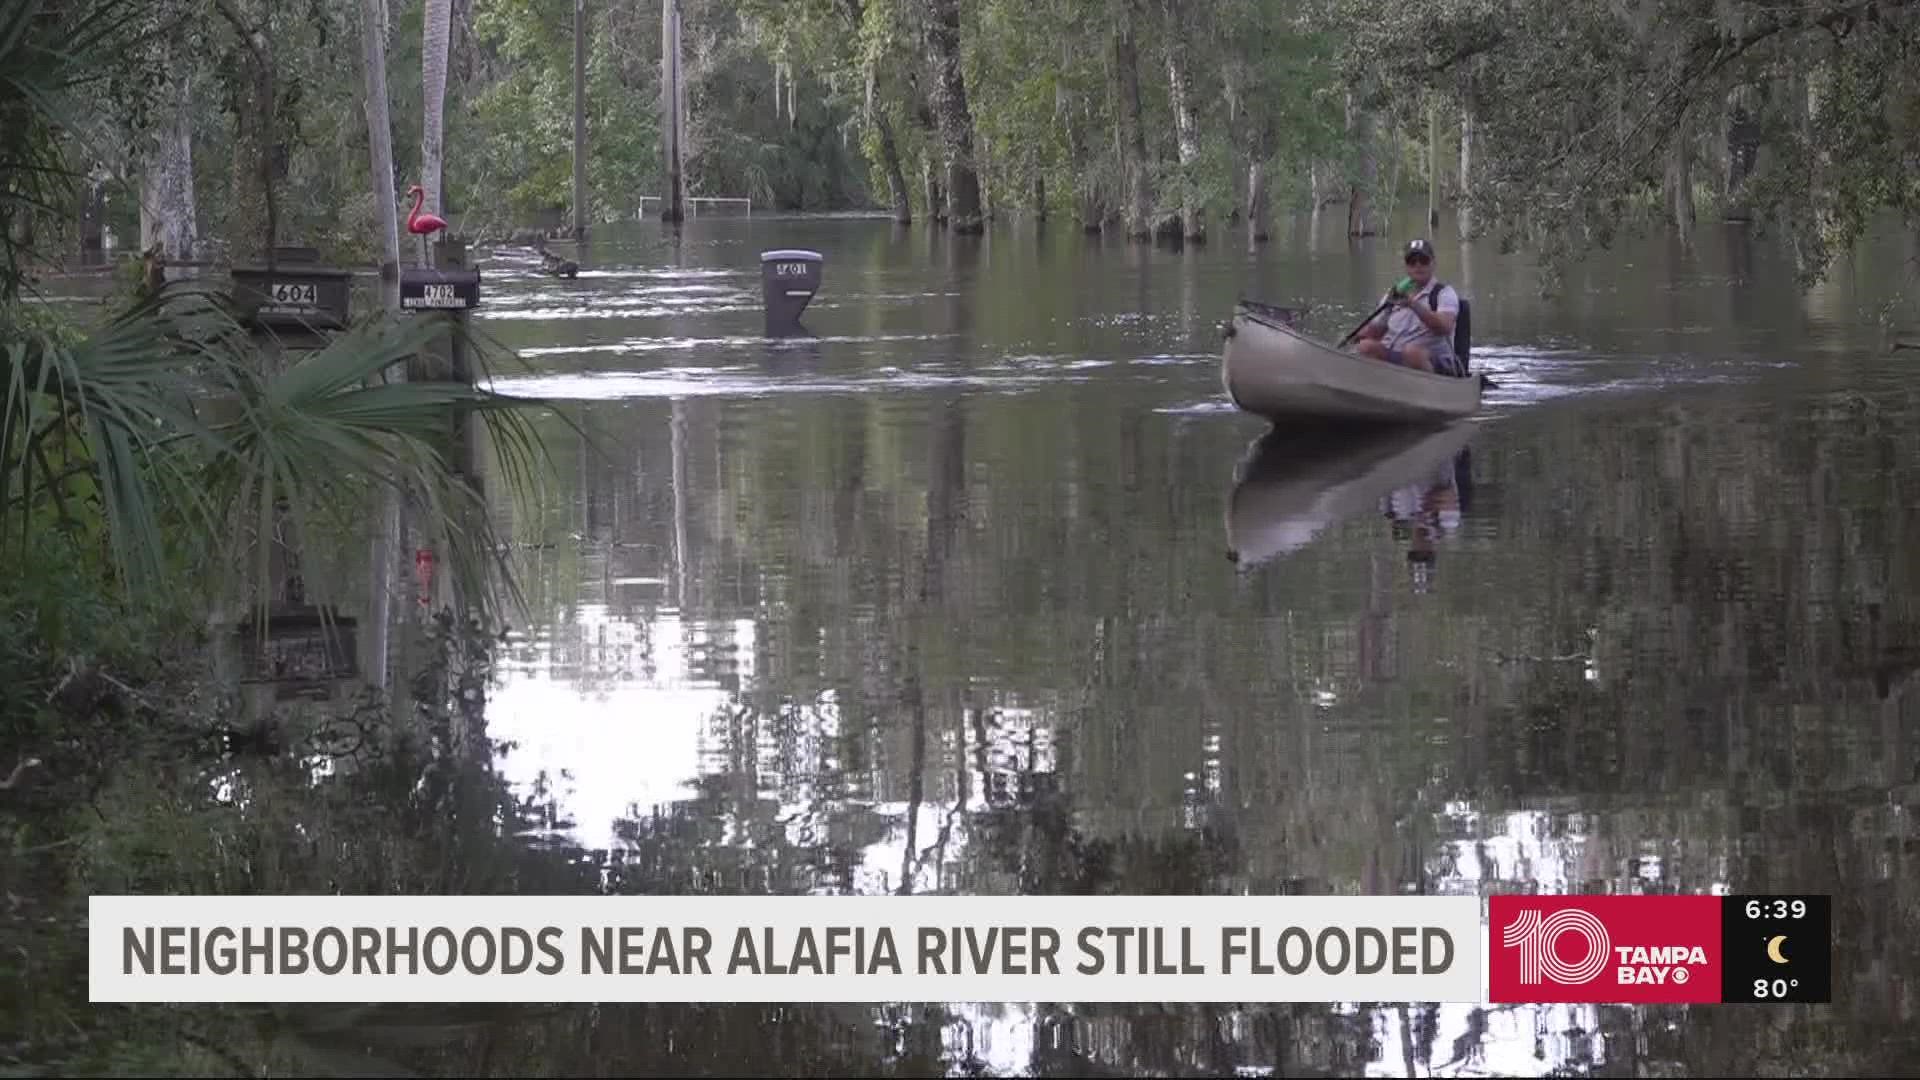 Some residents living along the Alafia River have resorted to getting around via canoes, but they say their spirits are high.